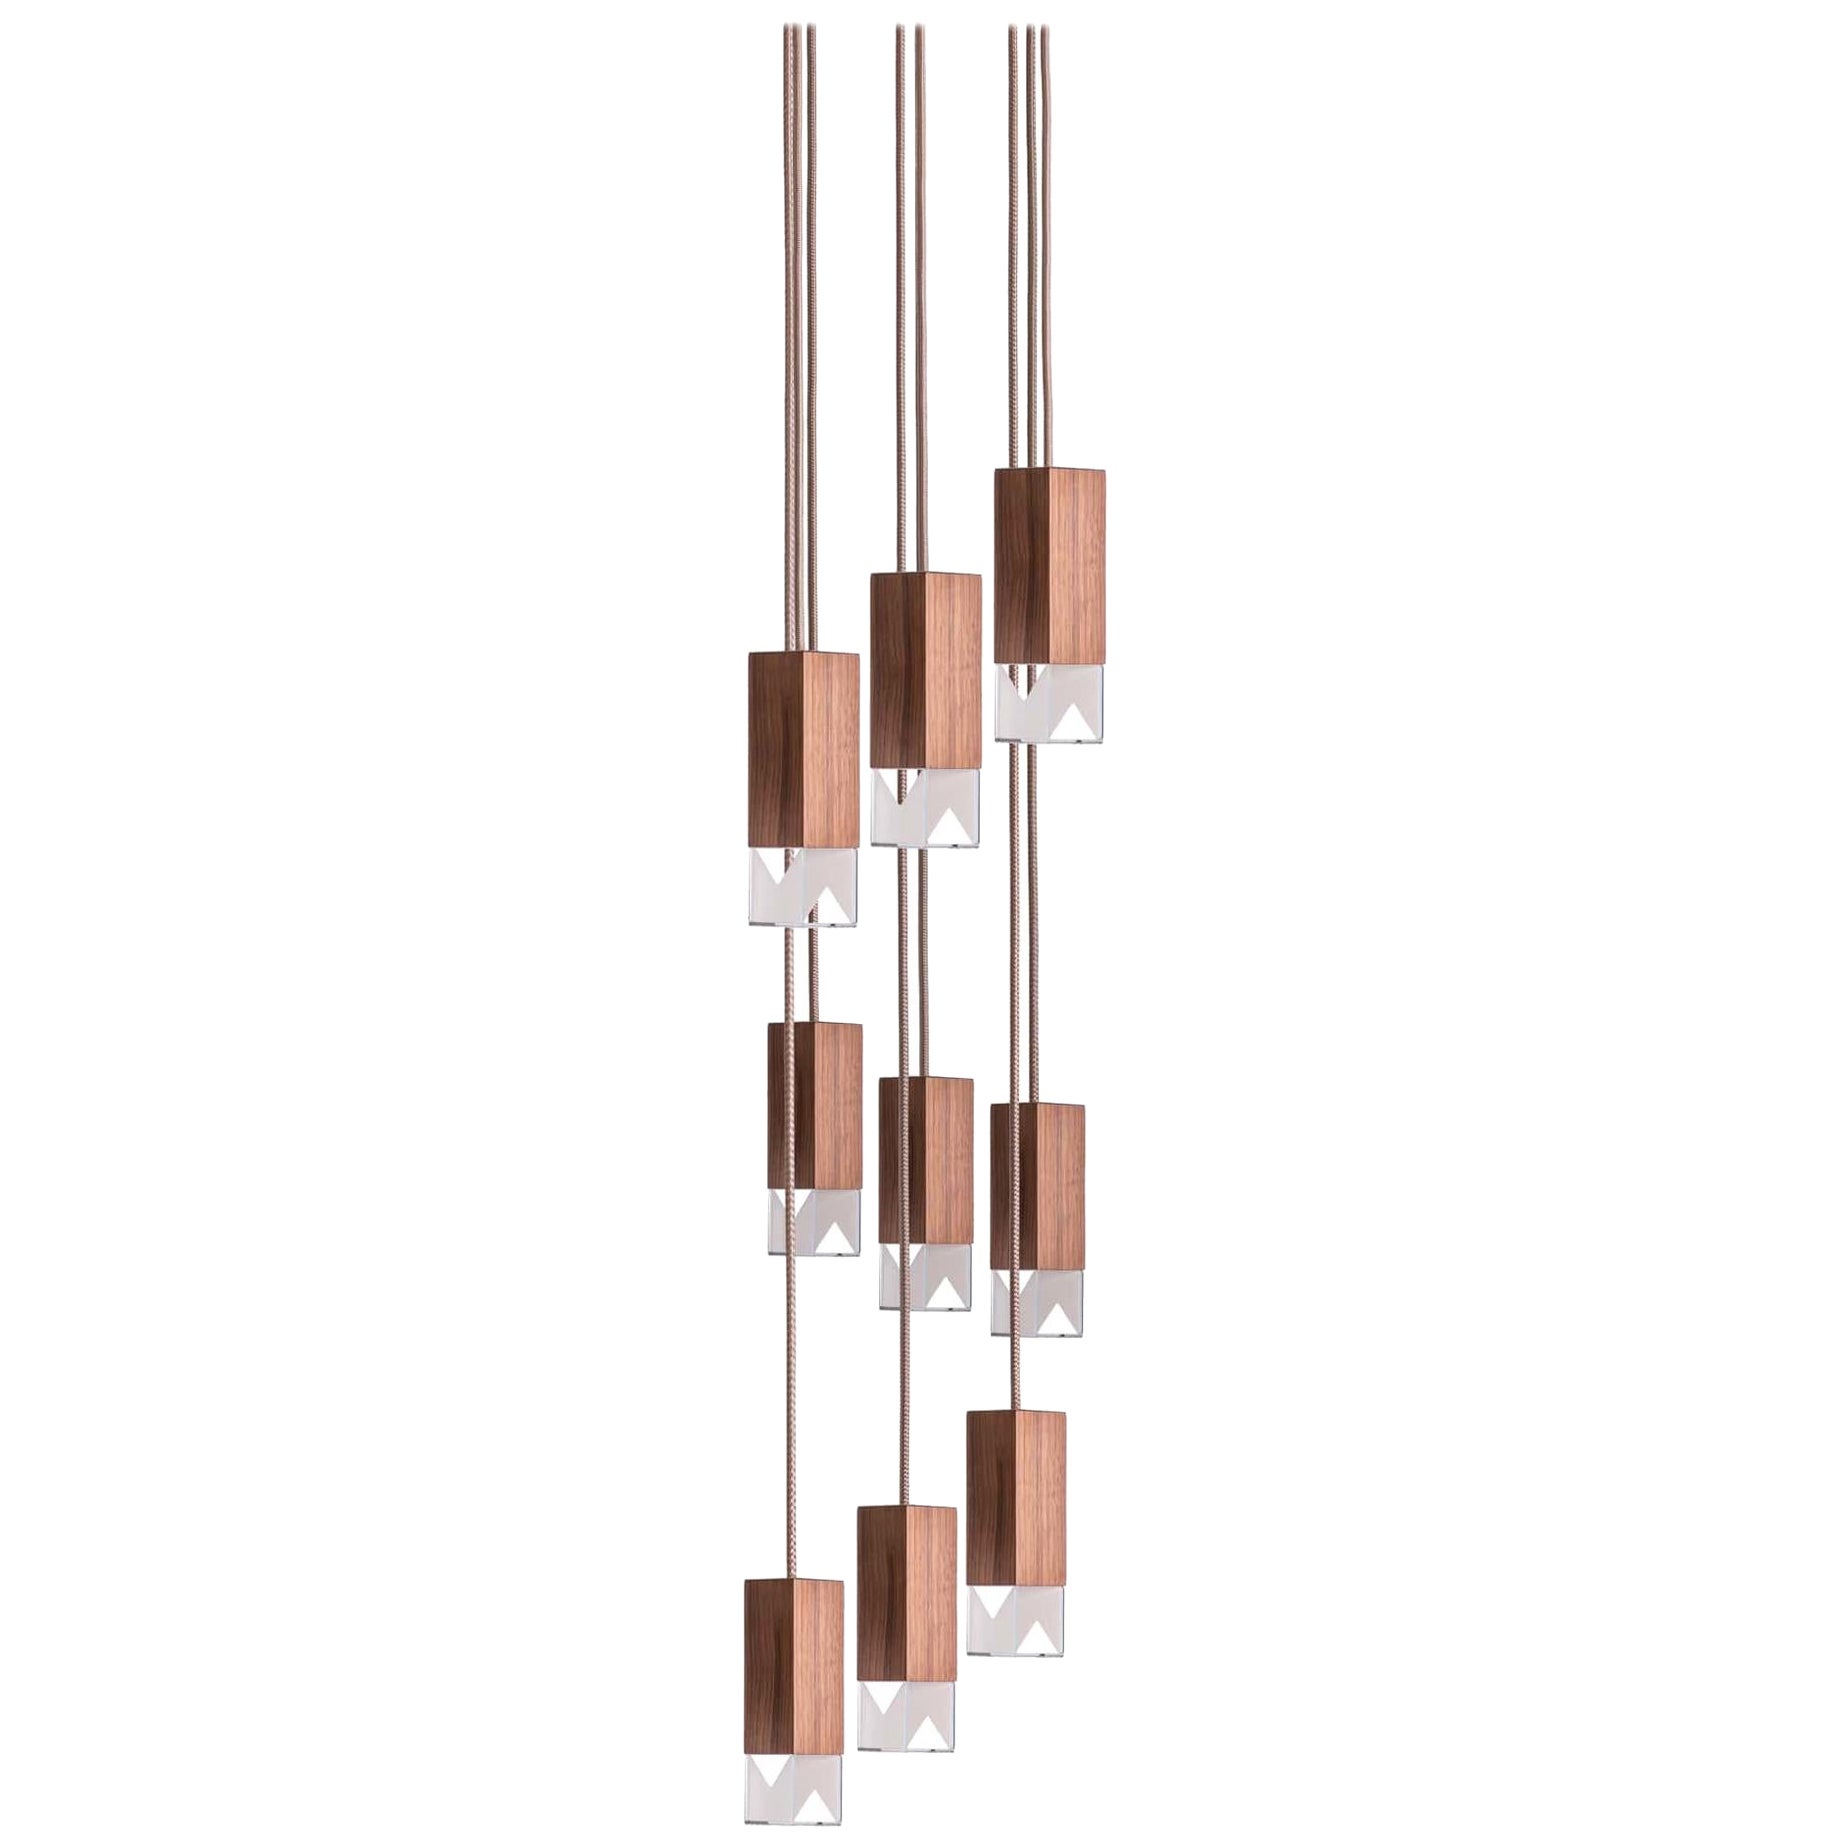 Lamp One 9-Light Chandelier in Walnut by Formaminima For Sale